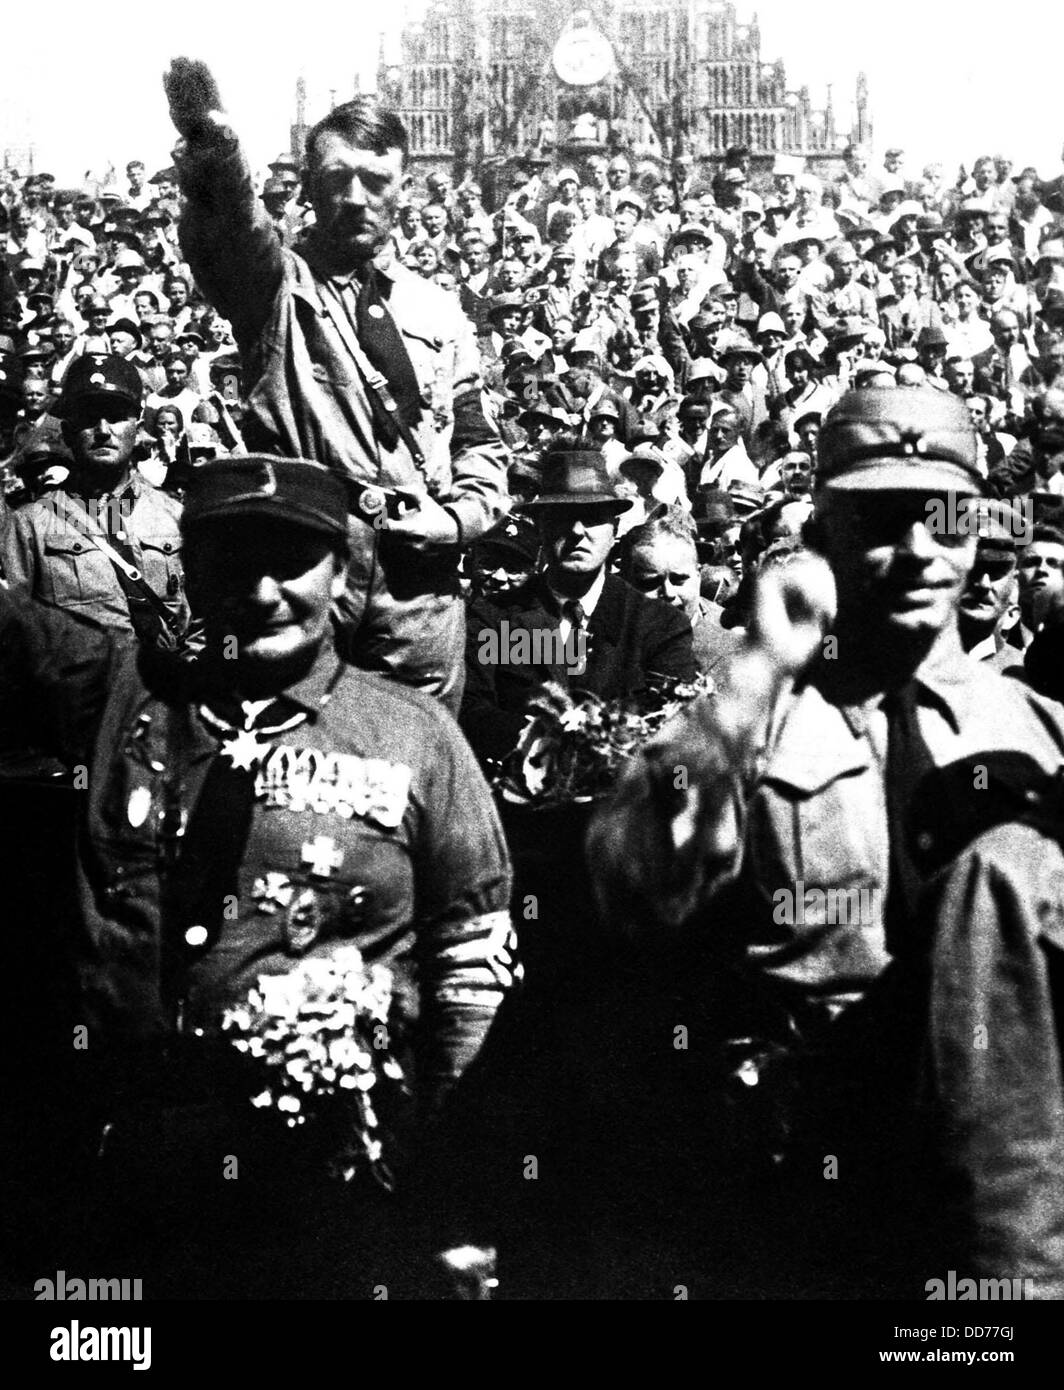 Hitler at Nazi Party rally, Nuremberg, Germany, ca. 1928. Herman Goering is in left foreground. Photo by Heinrich Hoffman. Stock Photo